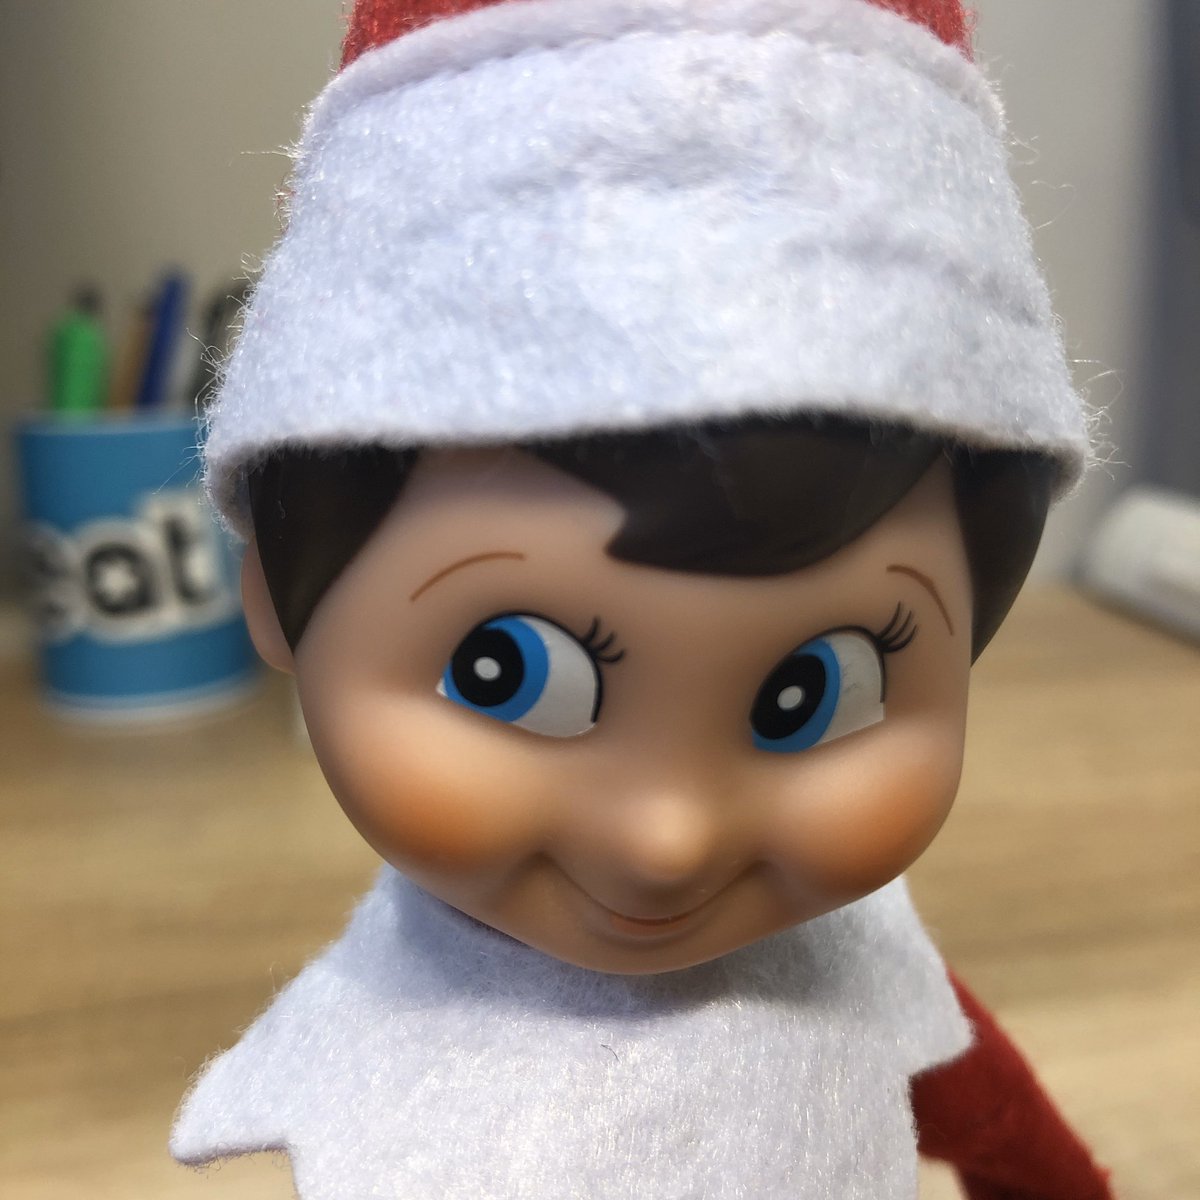 We have a new friend coming to stay with us at the eatlean farm for Christmas! Everyone meet Dean the Eatlean Elf 🥰 Dean has promised that he will be good, so I’m expecting no naughtiness during his stay! 👼 #elfontheshelf #livingonthefarm